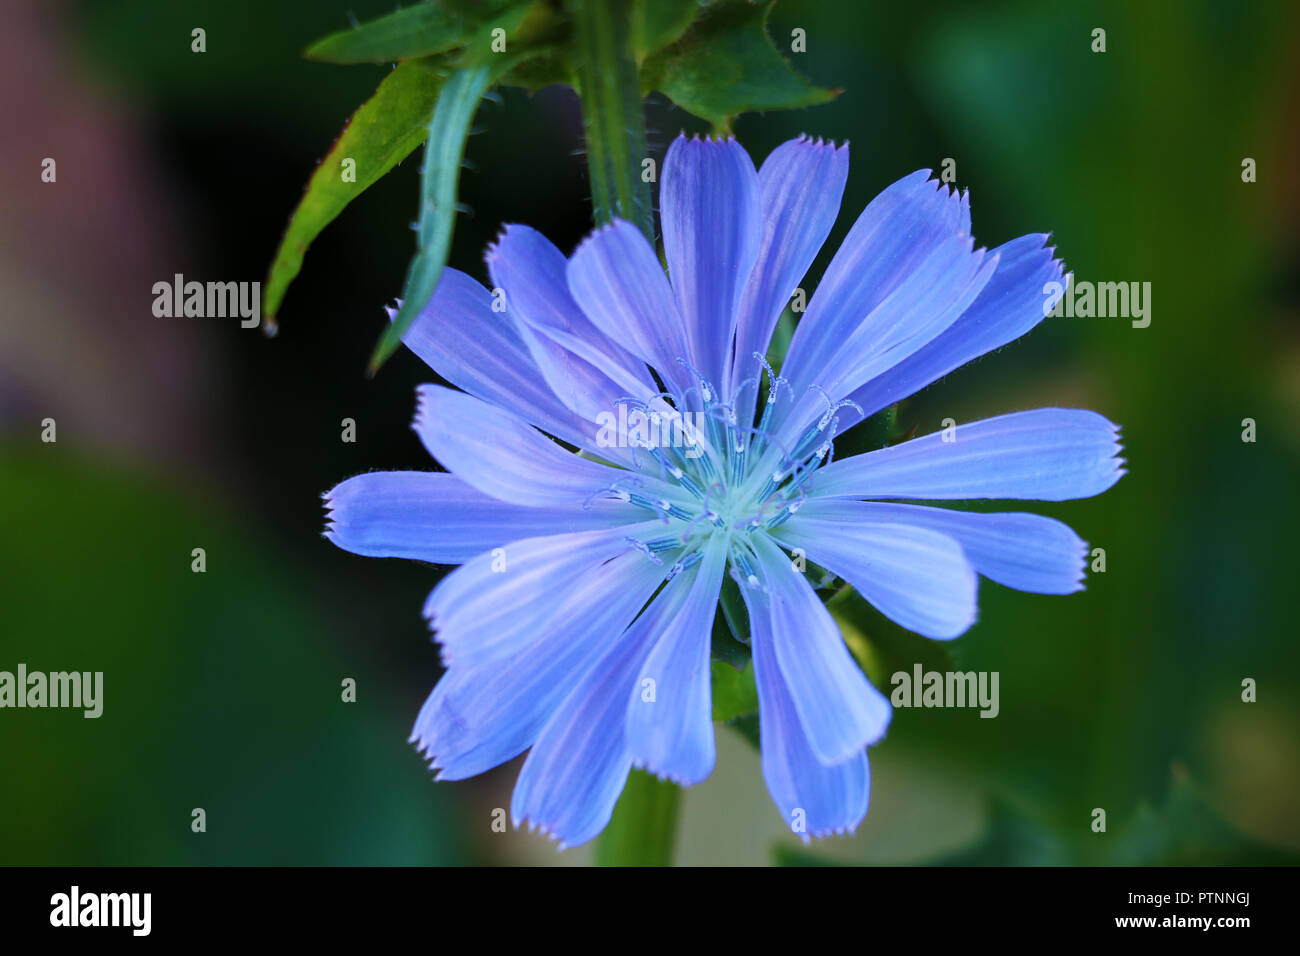 Common chicory, Cichorium intybus, is a perennial herbaceous plant of the dandelion family Asteraceae, usually with bright blue flowers. Stock Photo